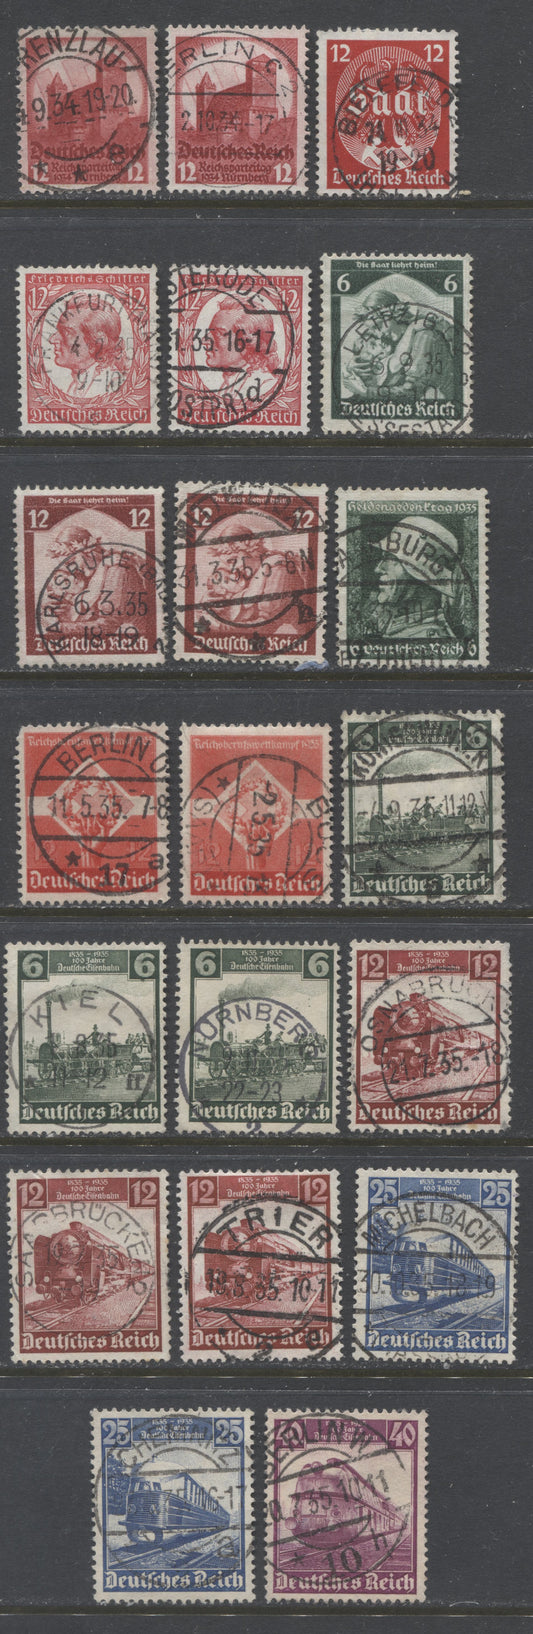 Lot 453 Germany SC#443/462 1934-1935 Nazi Congress Issue - Railroad Centenary Issues, All With SON Town Cancels, 20 VF Used Singles, Click on Listing to See ALL Pictures, 2022 Scott Classic Cat. $19.2